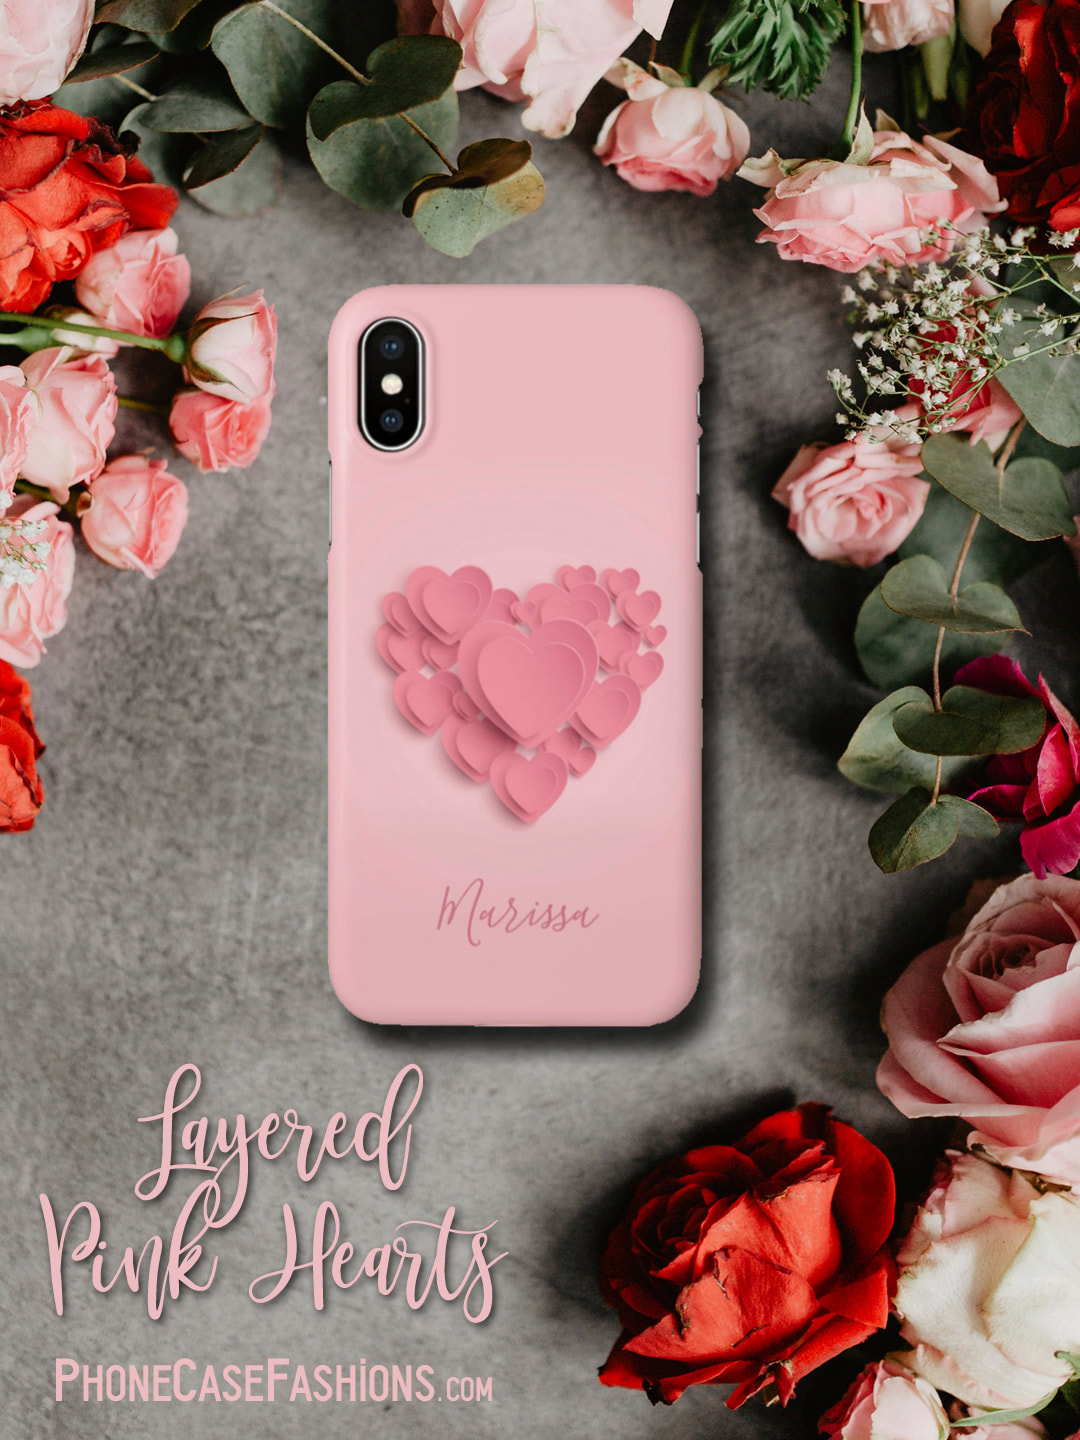 Layered bubble gum pink hearts on a baby pink background, a perfect cell phone case for the one you love, for Valentine's Day, Mother's Day, the new bride-to-be, or just because.